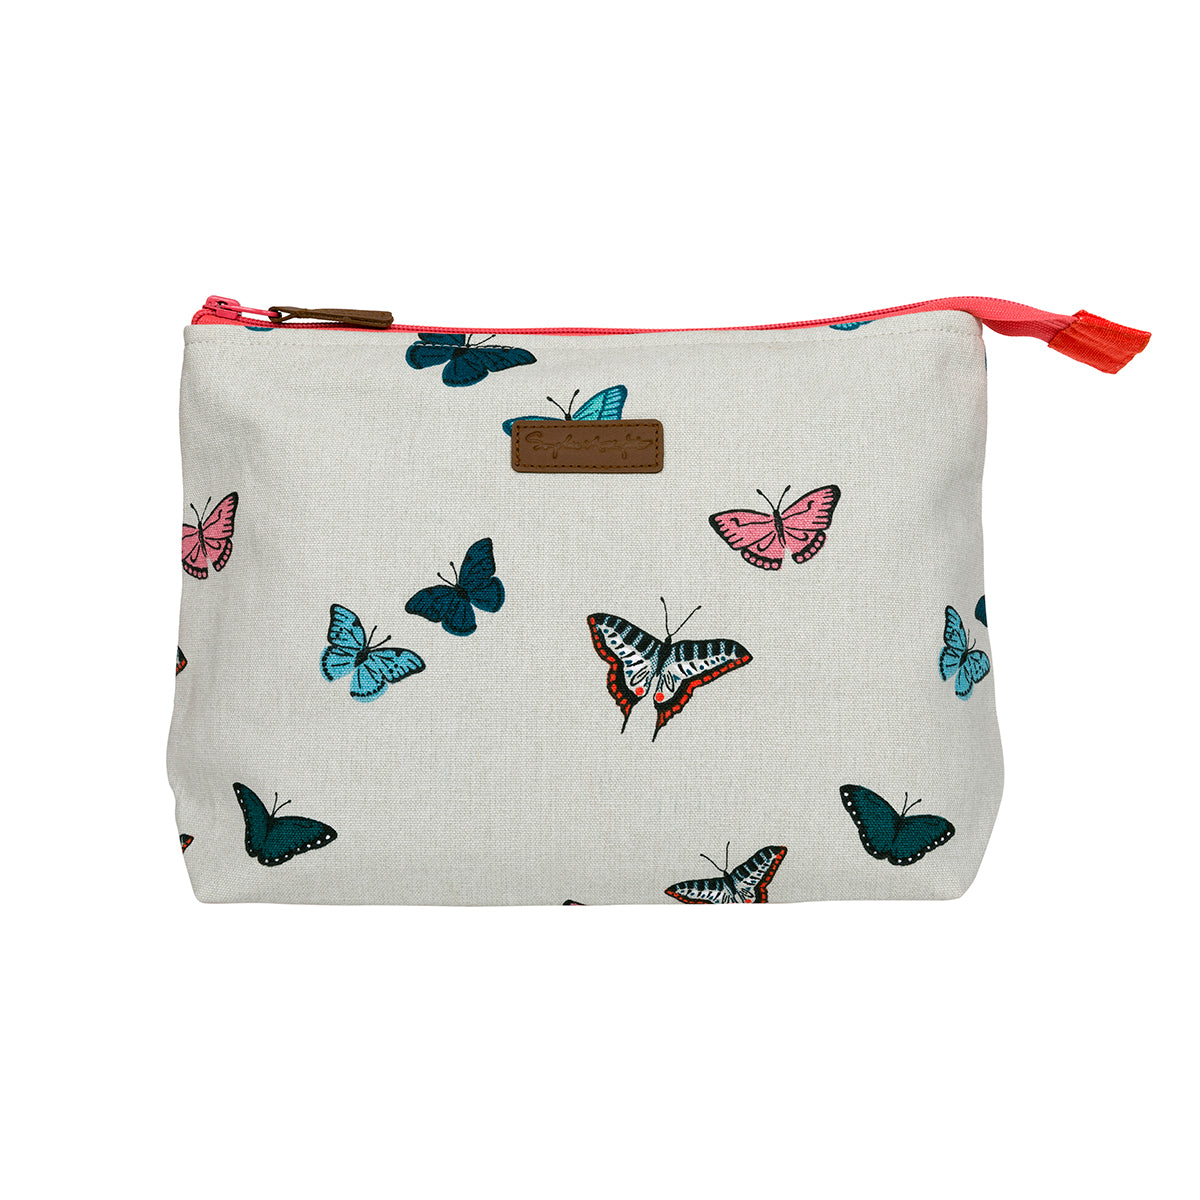 Sophie Allport Butterflies Wash Bag covered in colourful butterflies on a neutral background.